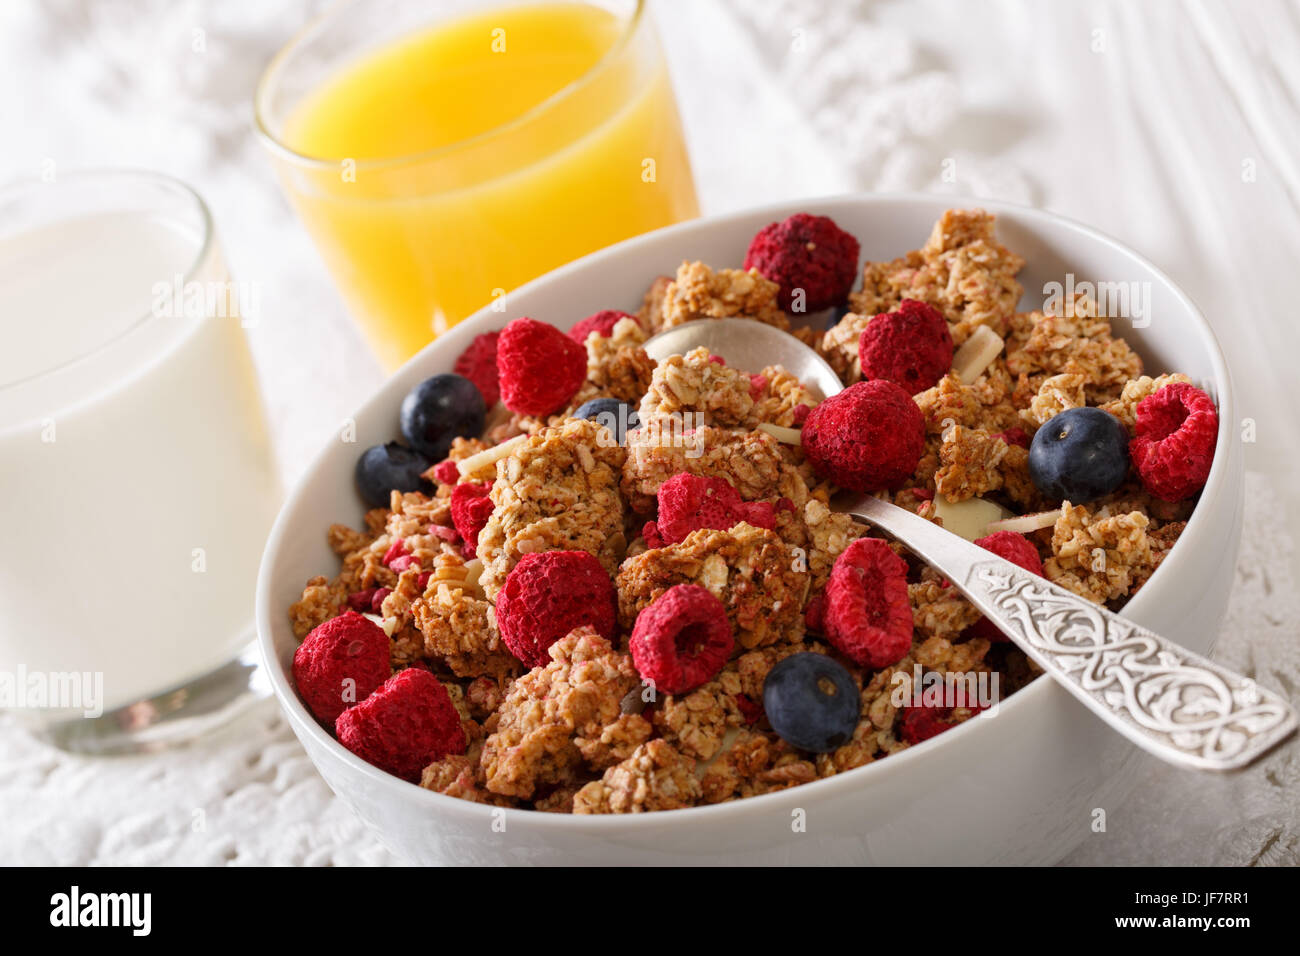 Granola with raspberries and blueberries, milk and orange juice close-up on a table. horizontal Stock Photo